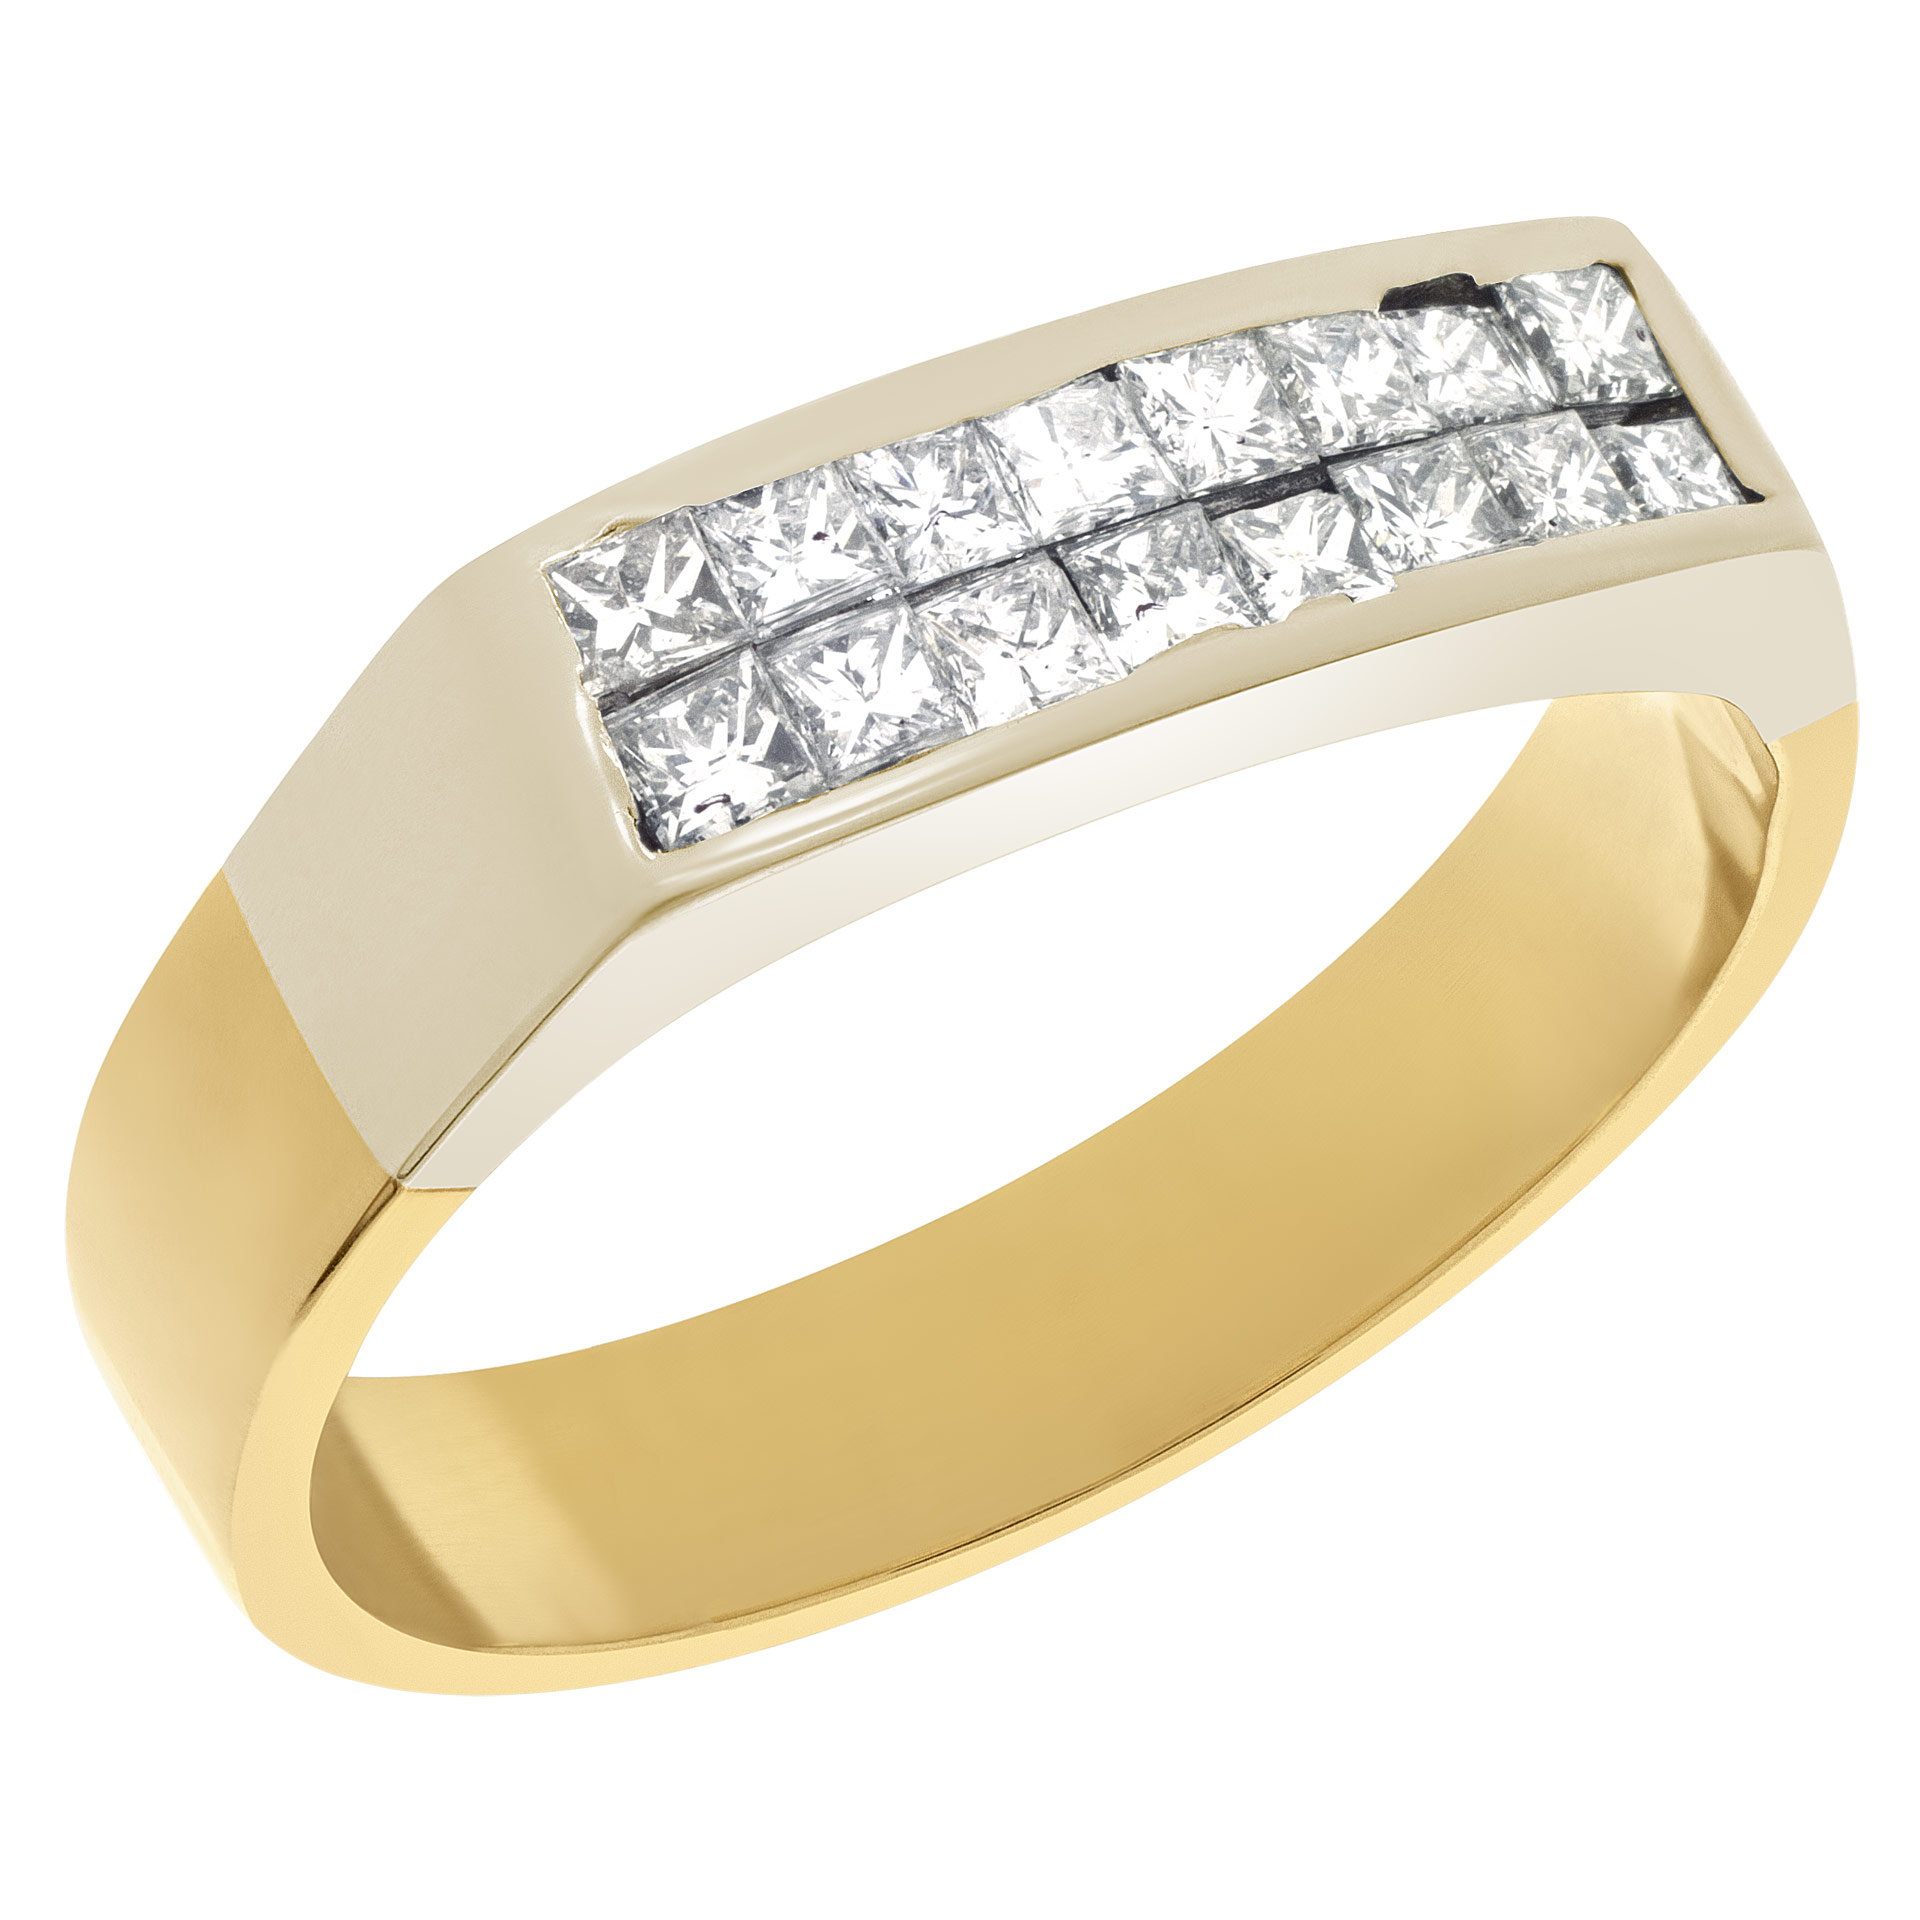 Mens diamond ring in 14k yellow gold with .64 cts in diamond accents image 2